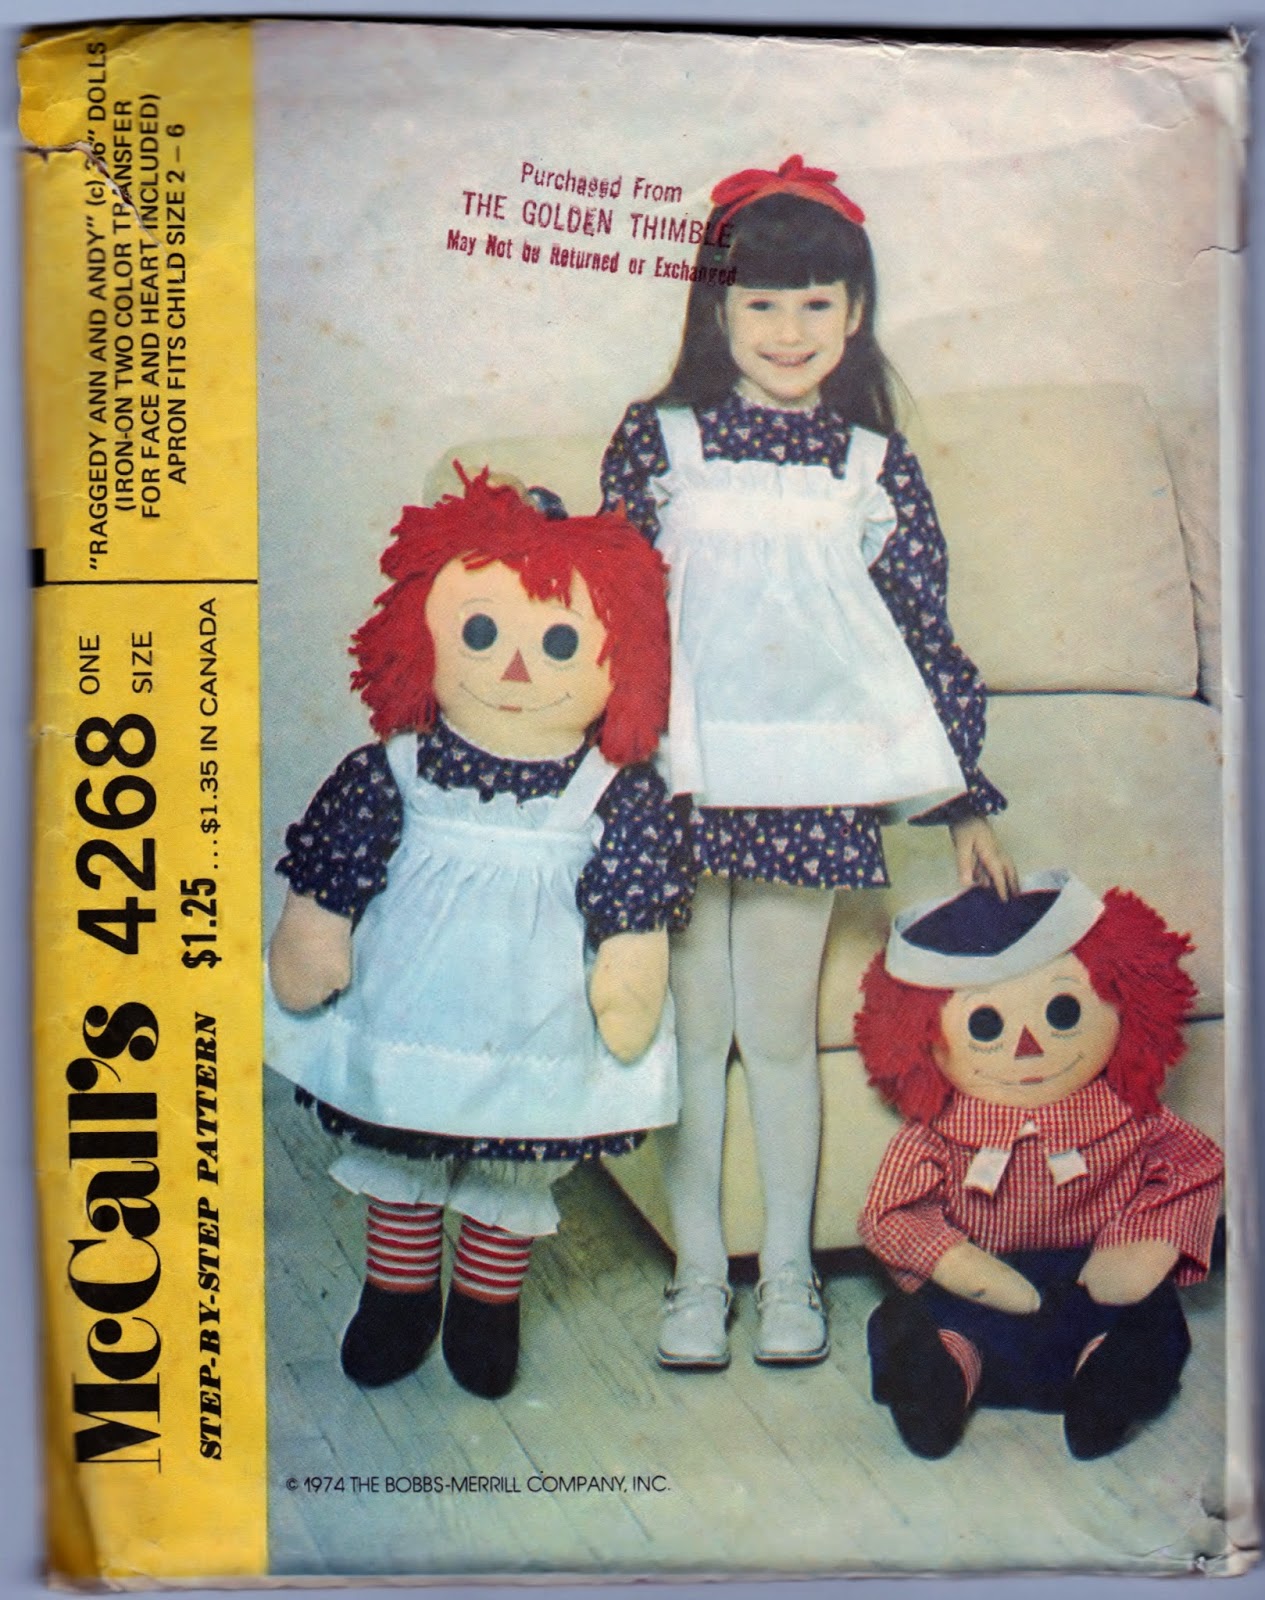 https://www.etsy.com/listing/128726456/raggedy-ann-and-andy?ref=shop_home_active_4